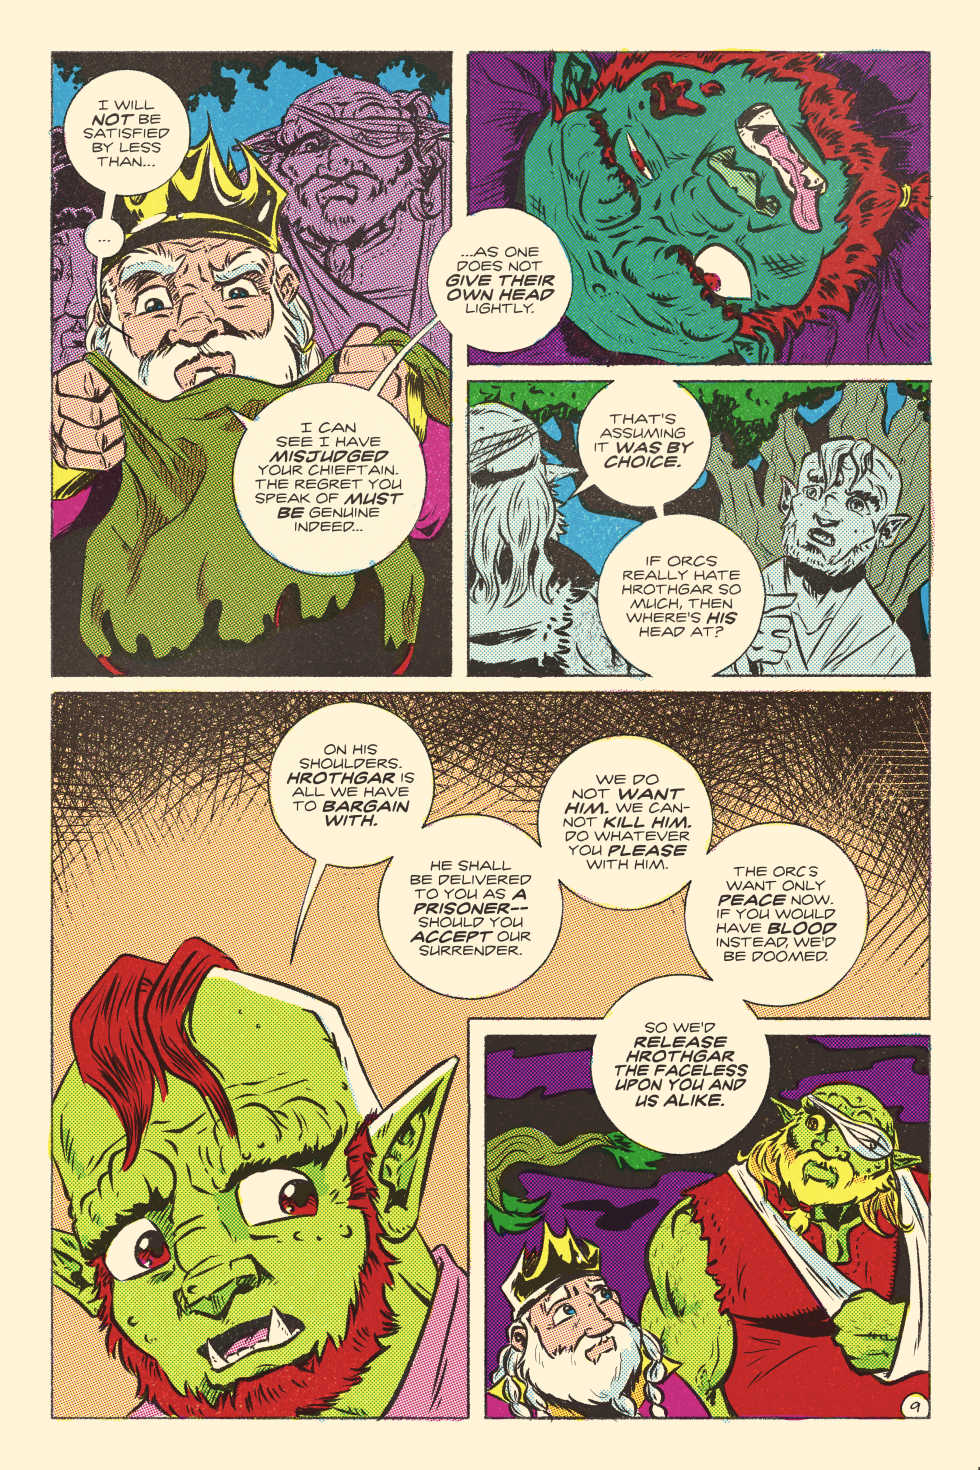 #315 – The Orcs’ Terms